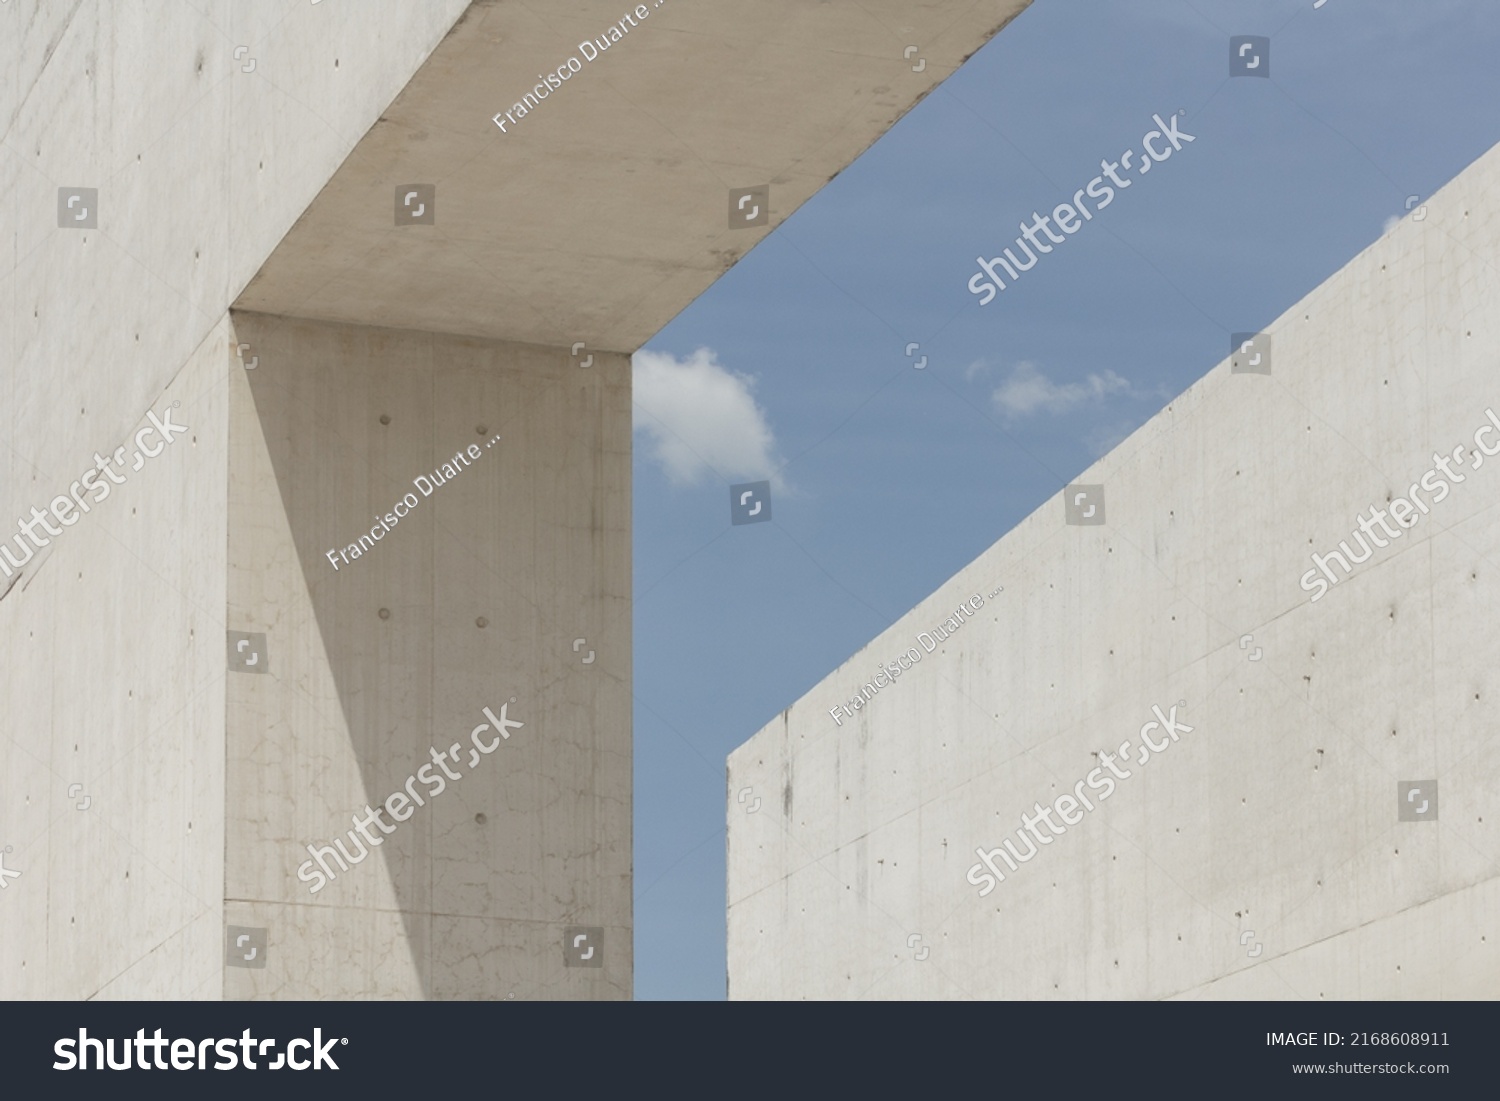 Architectural photography. Geometric composition with two large and strong cement blocks. building against the blue sky with white clouds. Modern structures architecture. Minimalist design fragments. #2168608911